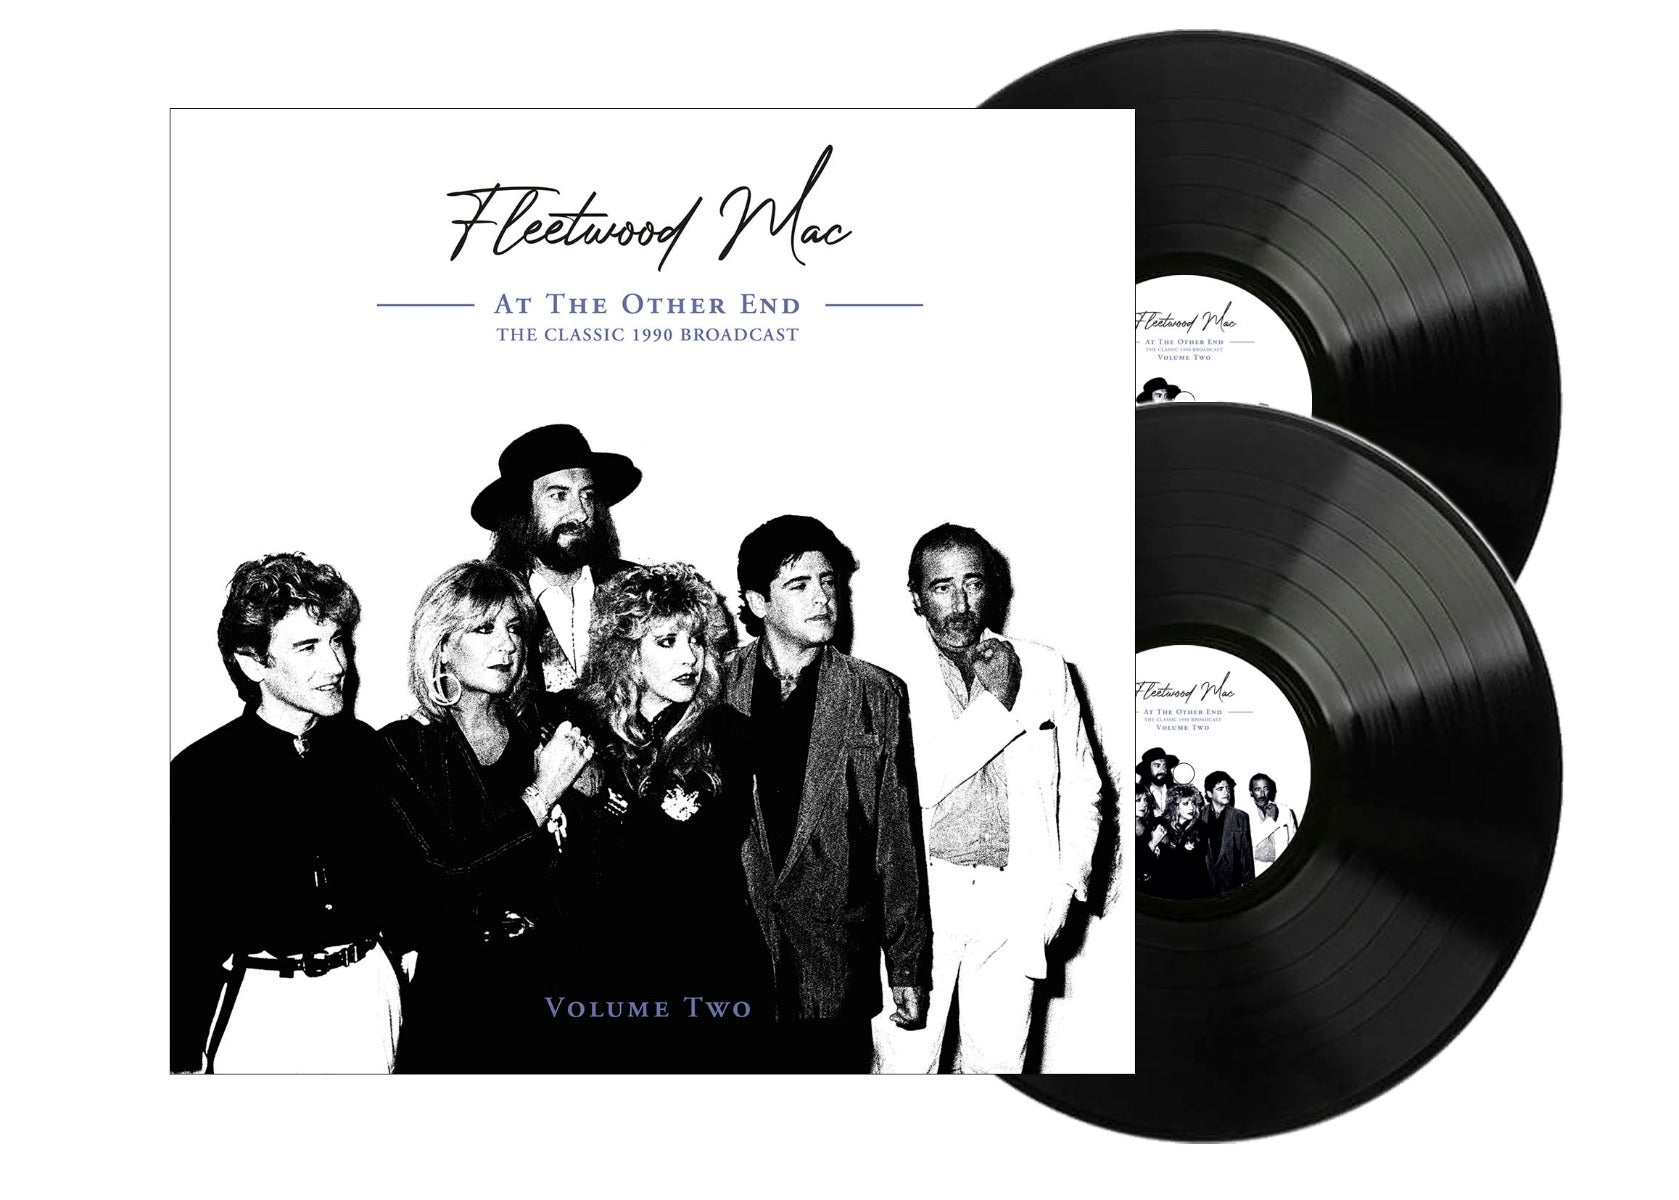 Fleetwood Mac At The Other End: The Classic 1990 - Broadcast Vol.2 Vinyl